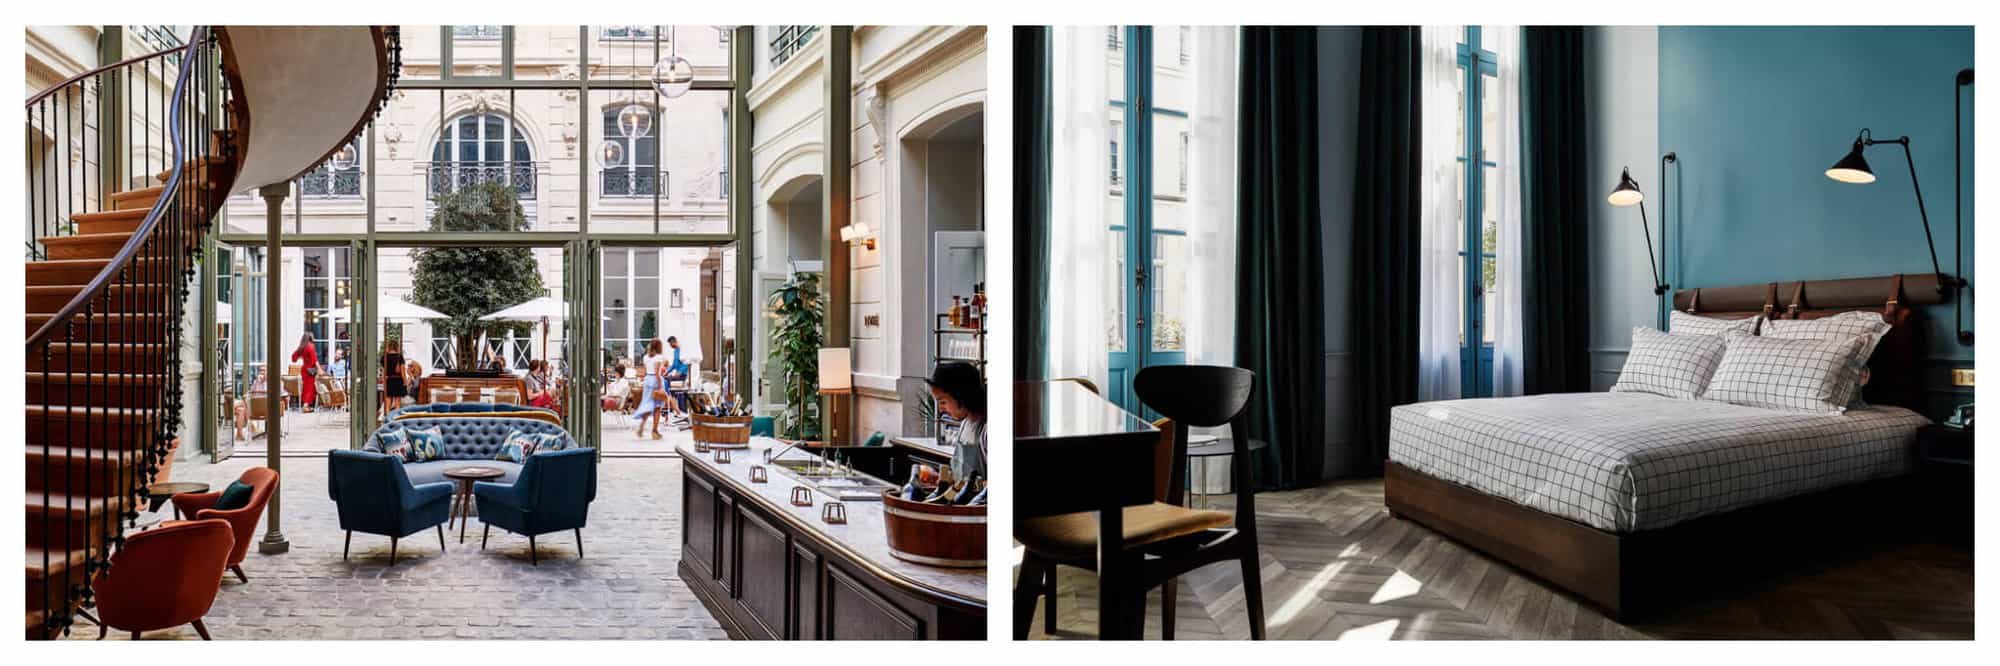 Left- The lobby of The Hoxton shows a large staircase in front of floor to ceiling windows revealing a courtyard. 
Right- A dark blue painted hotel room at The Hoxton. 